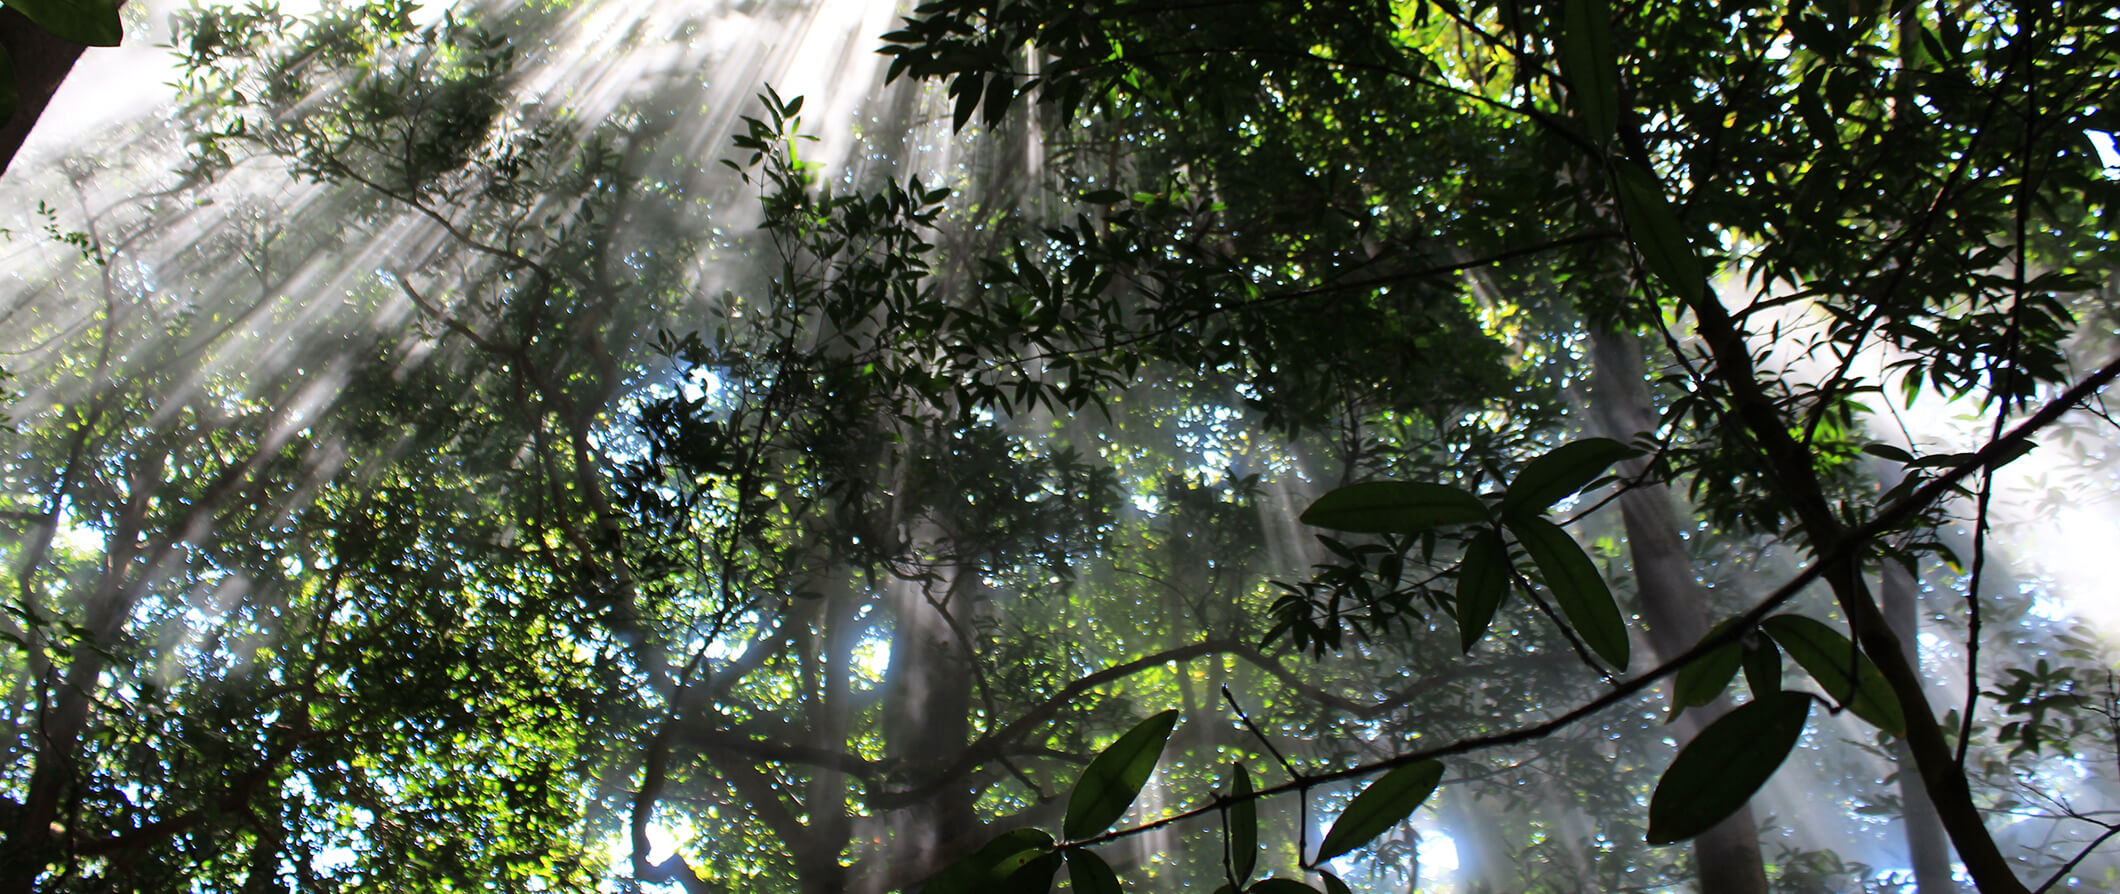 trees in Monteverde Costa Rica with the sunlight streaming through